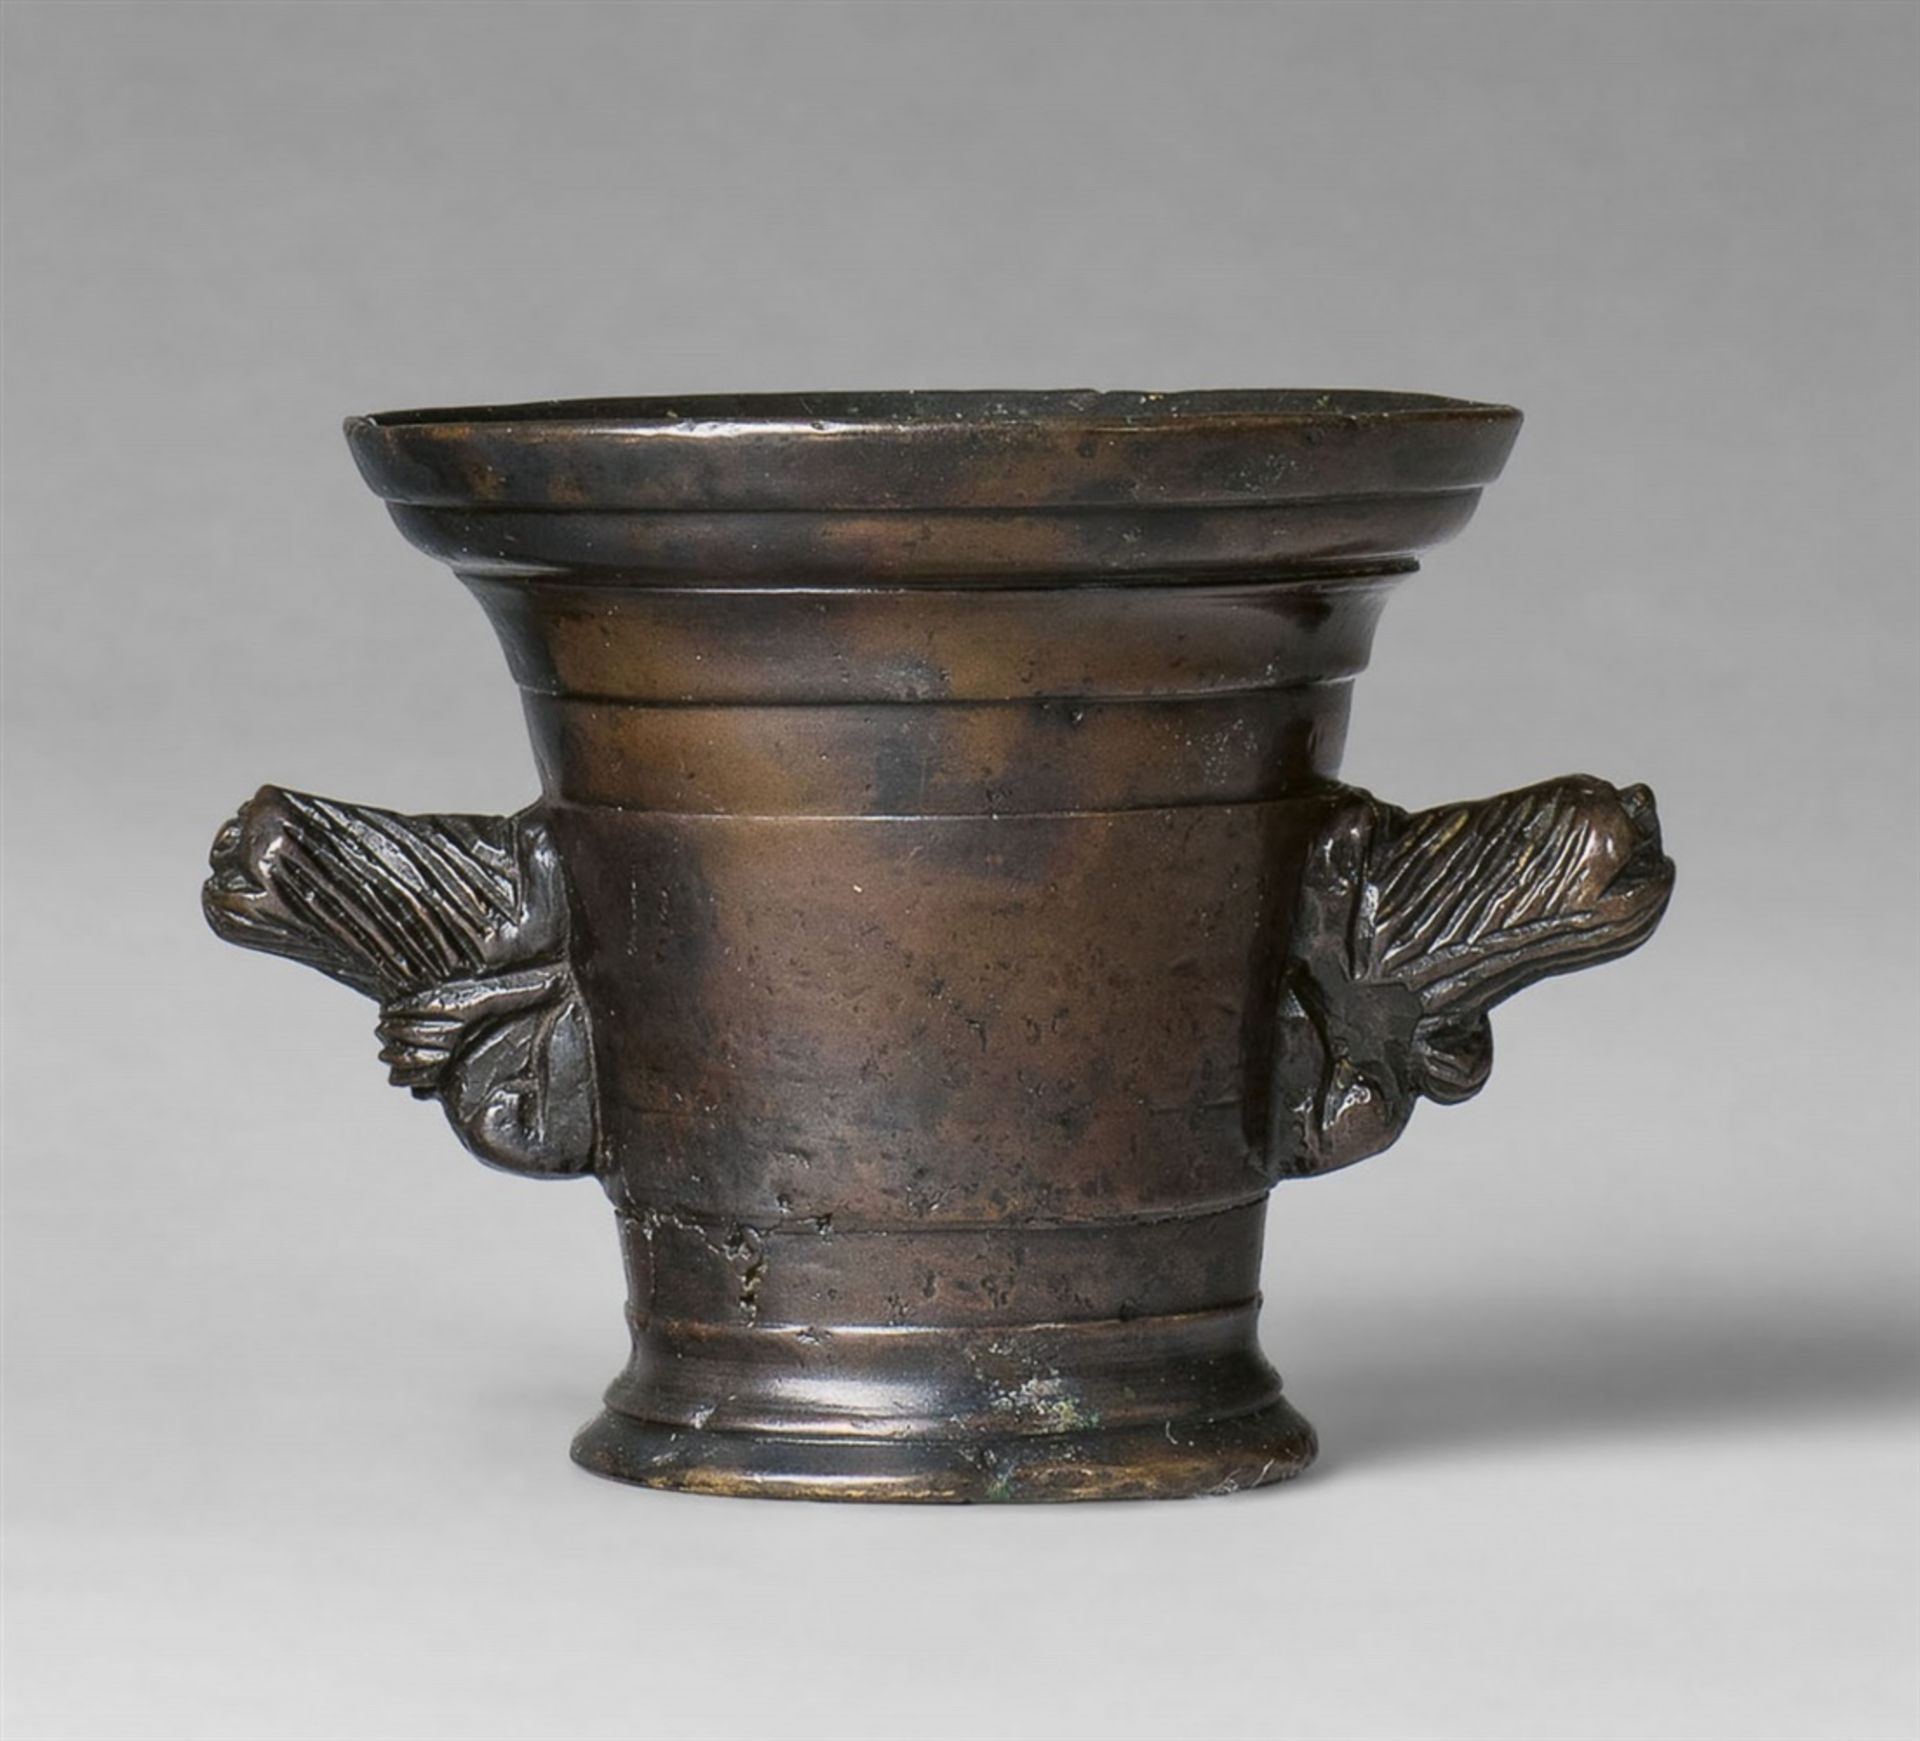 A small mortar with lion handlesCast bronze with golden brown patina. The handles formed as two